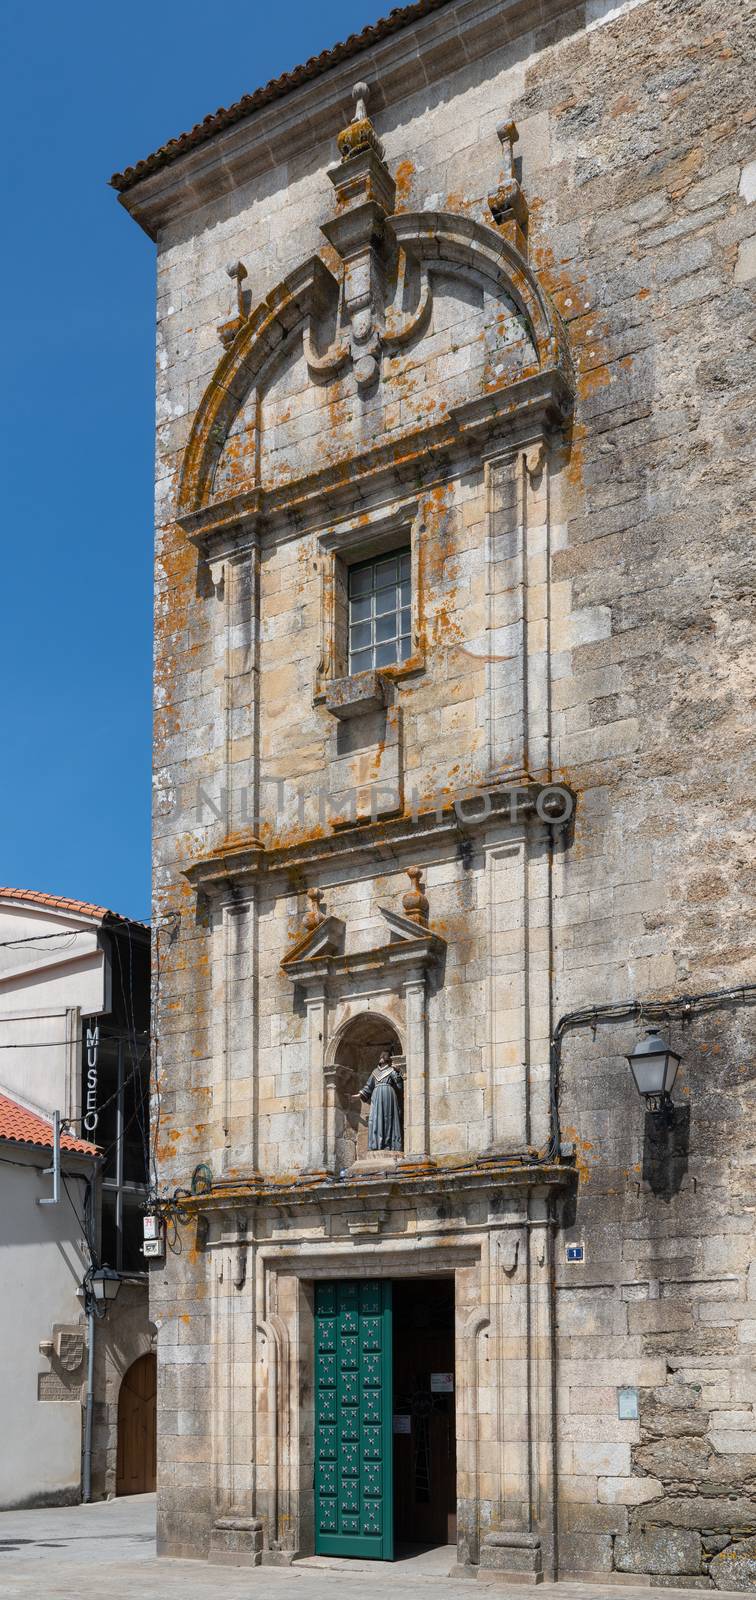 Main church in the city center of Melide, Galicia, Spain